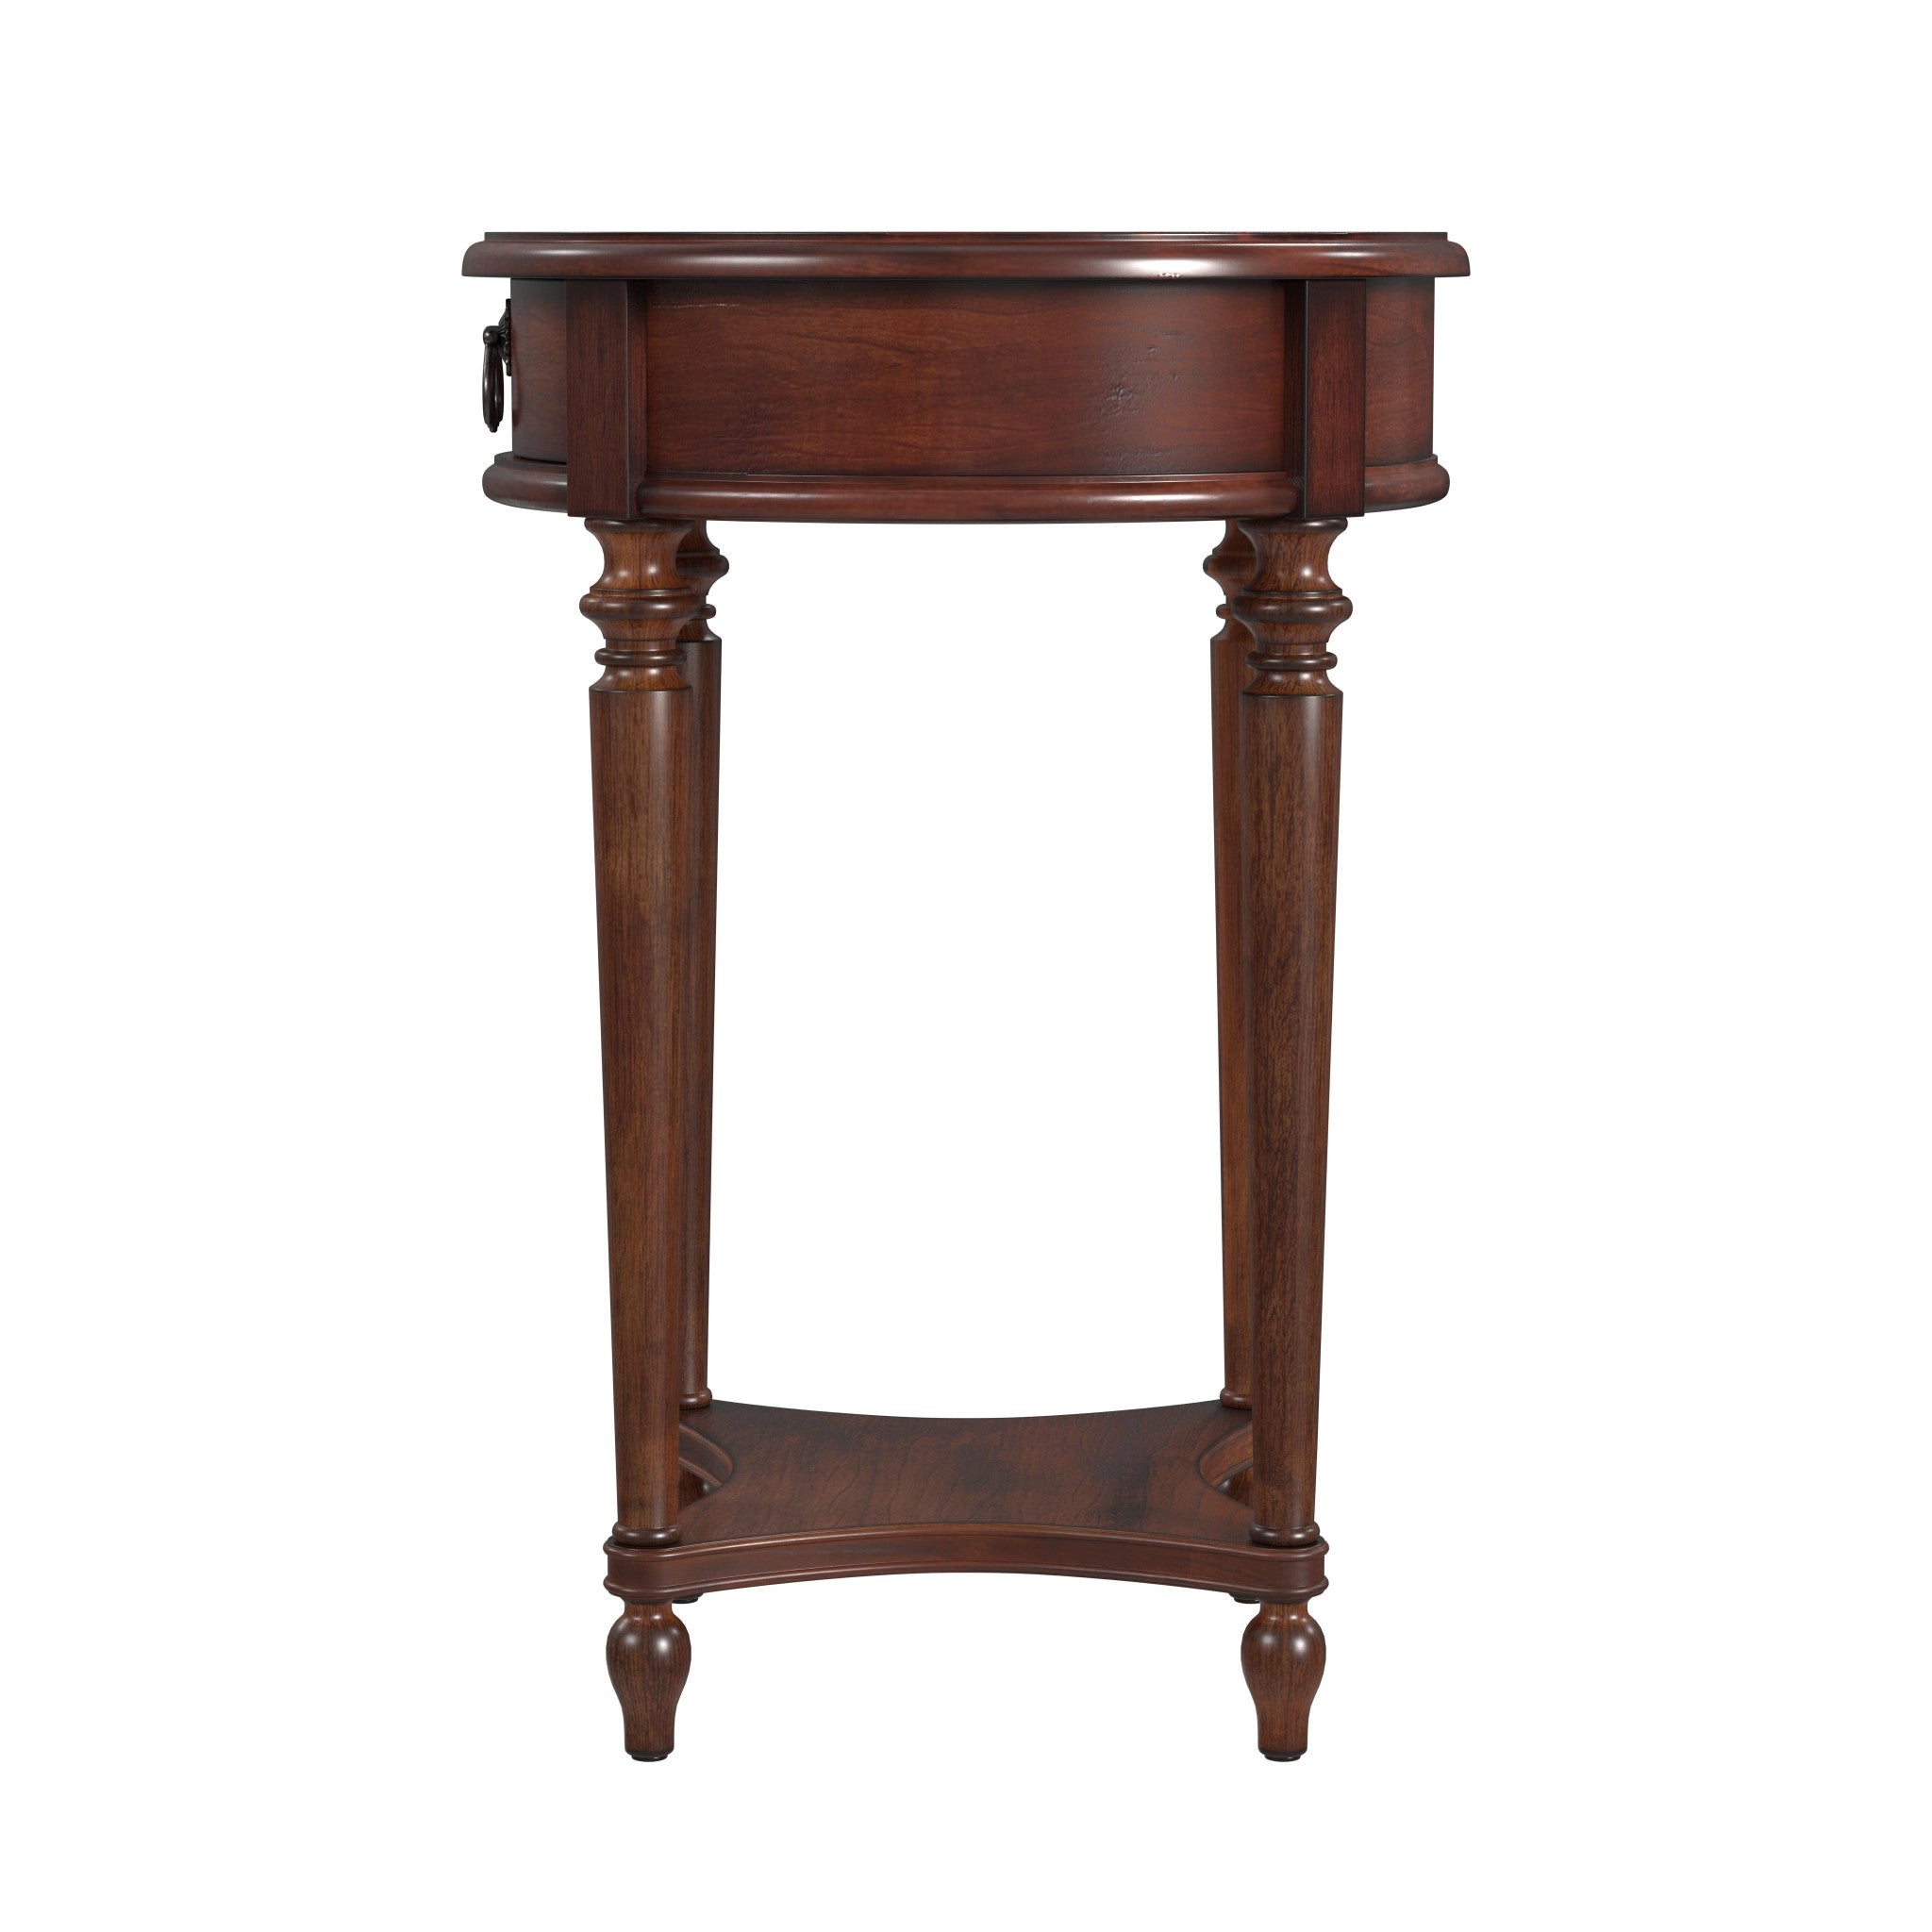 26" Cherry Solid And Manufactured Wood Round End Table With Drawer And Shelf